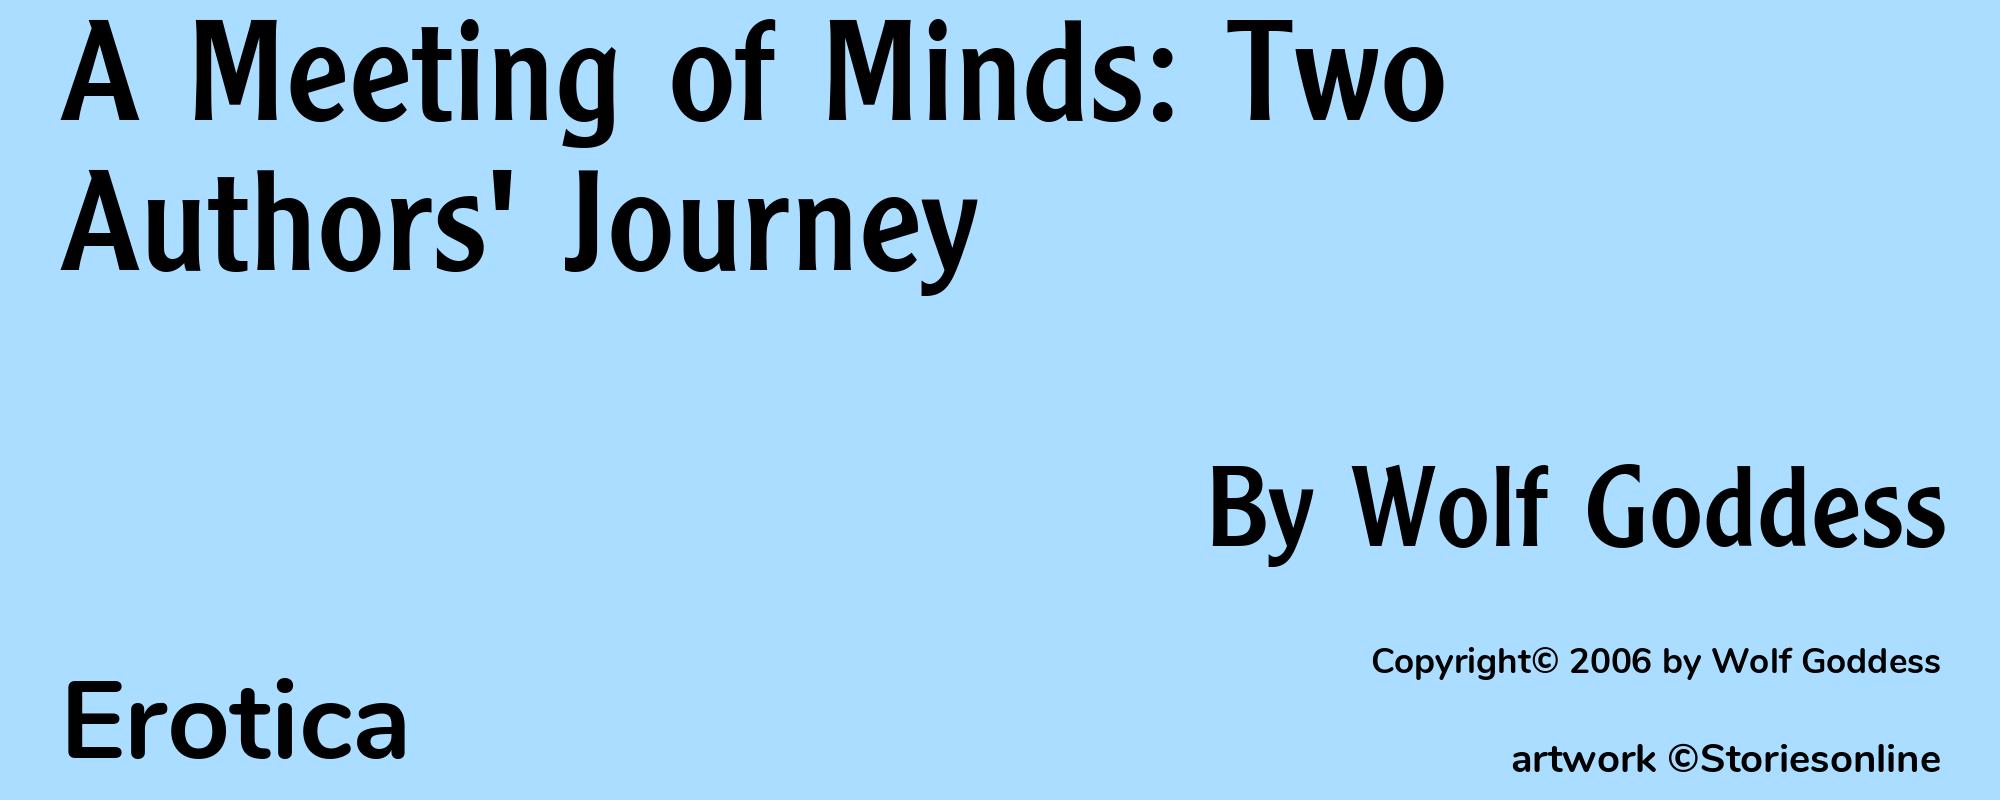 A Meeting of Minds: Two Authors' Journey - Cover